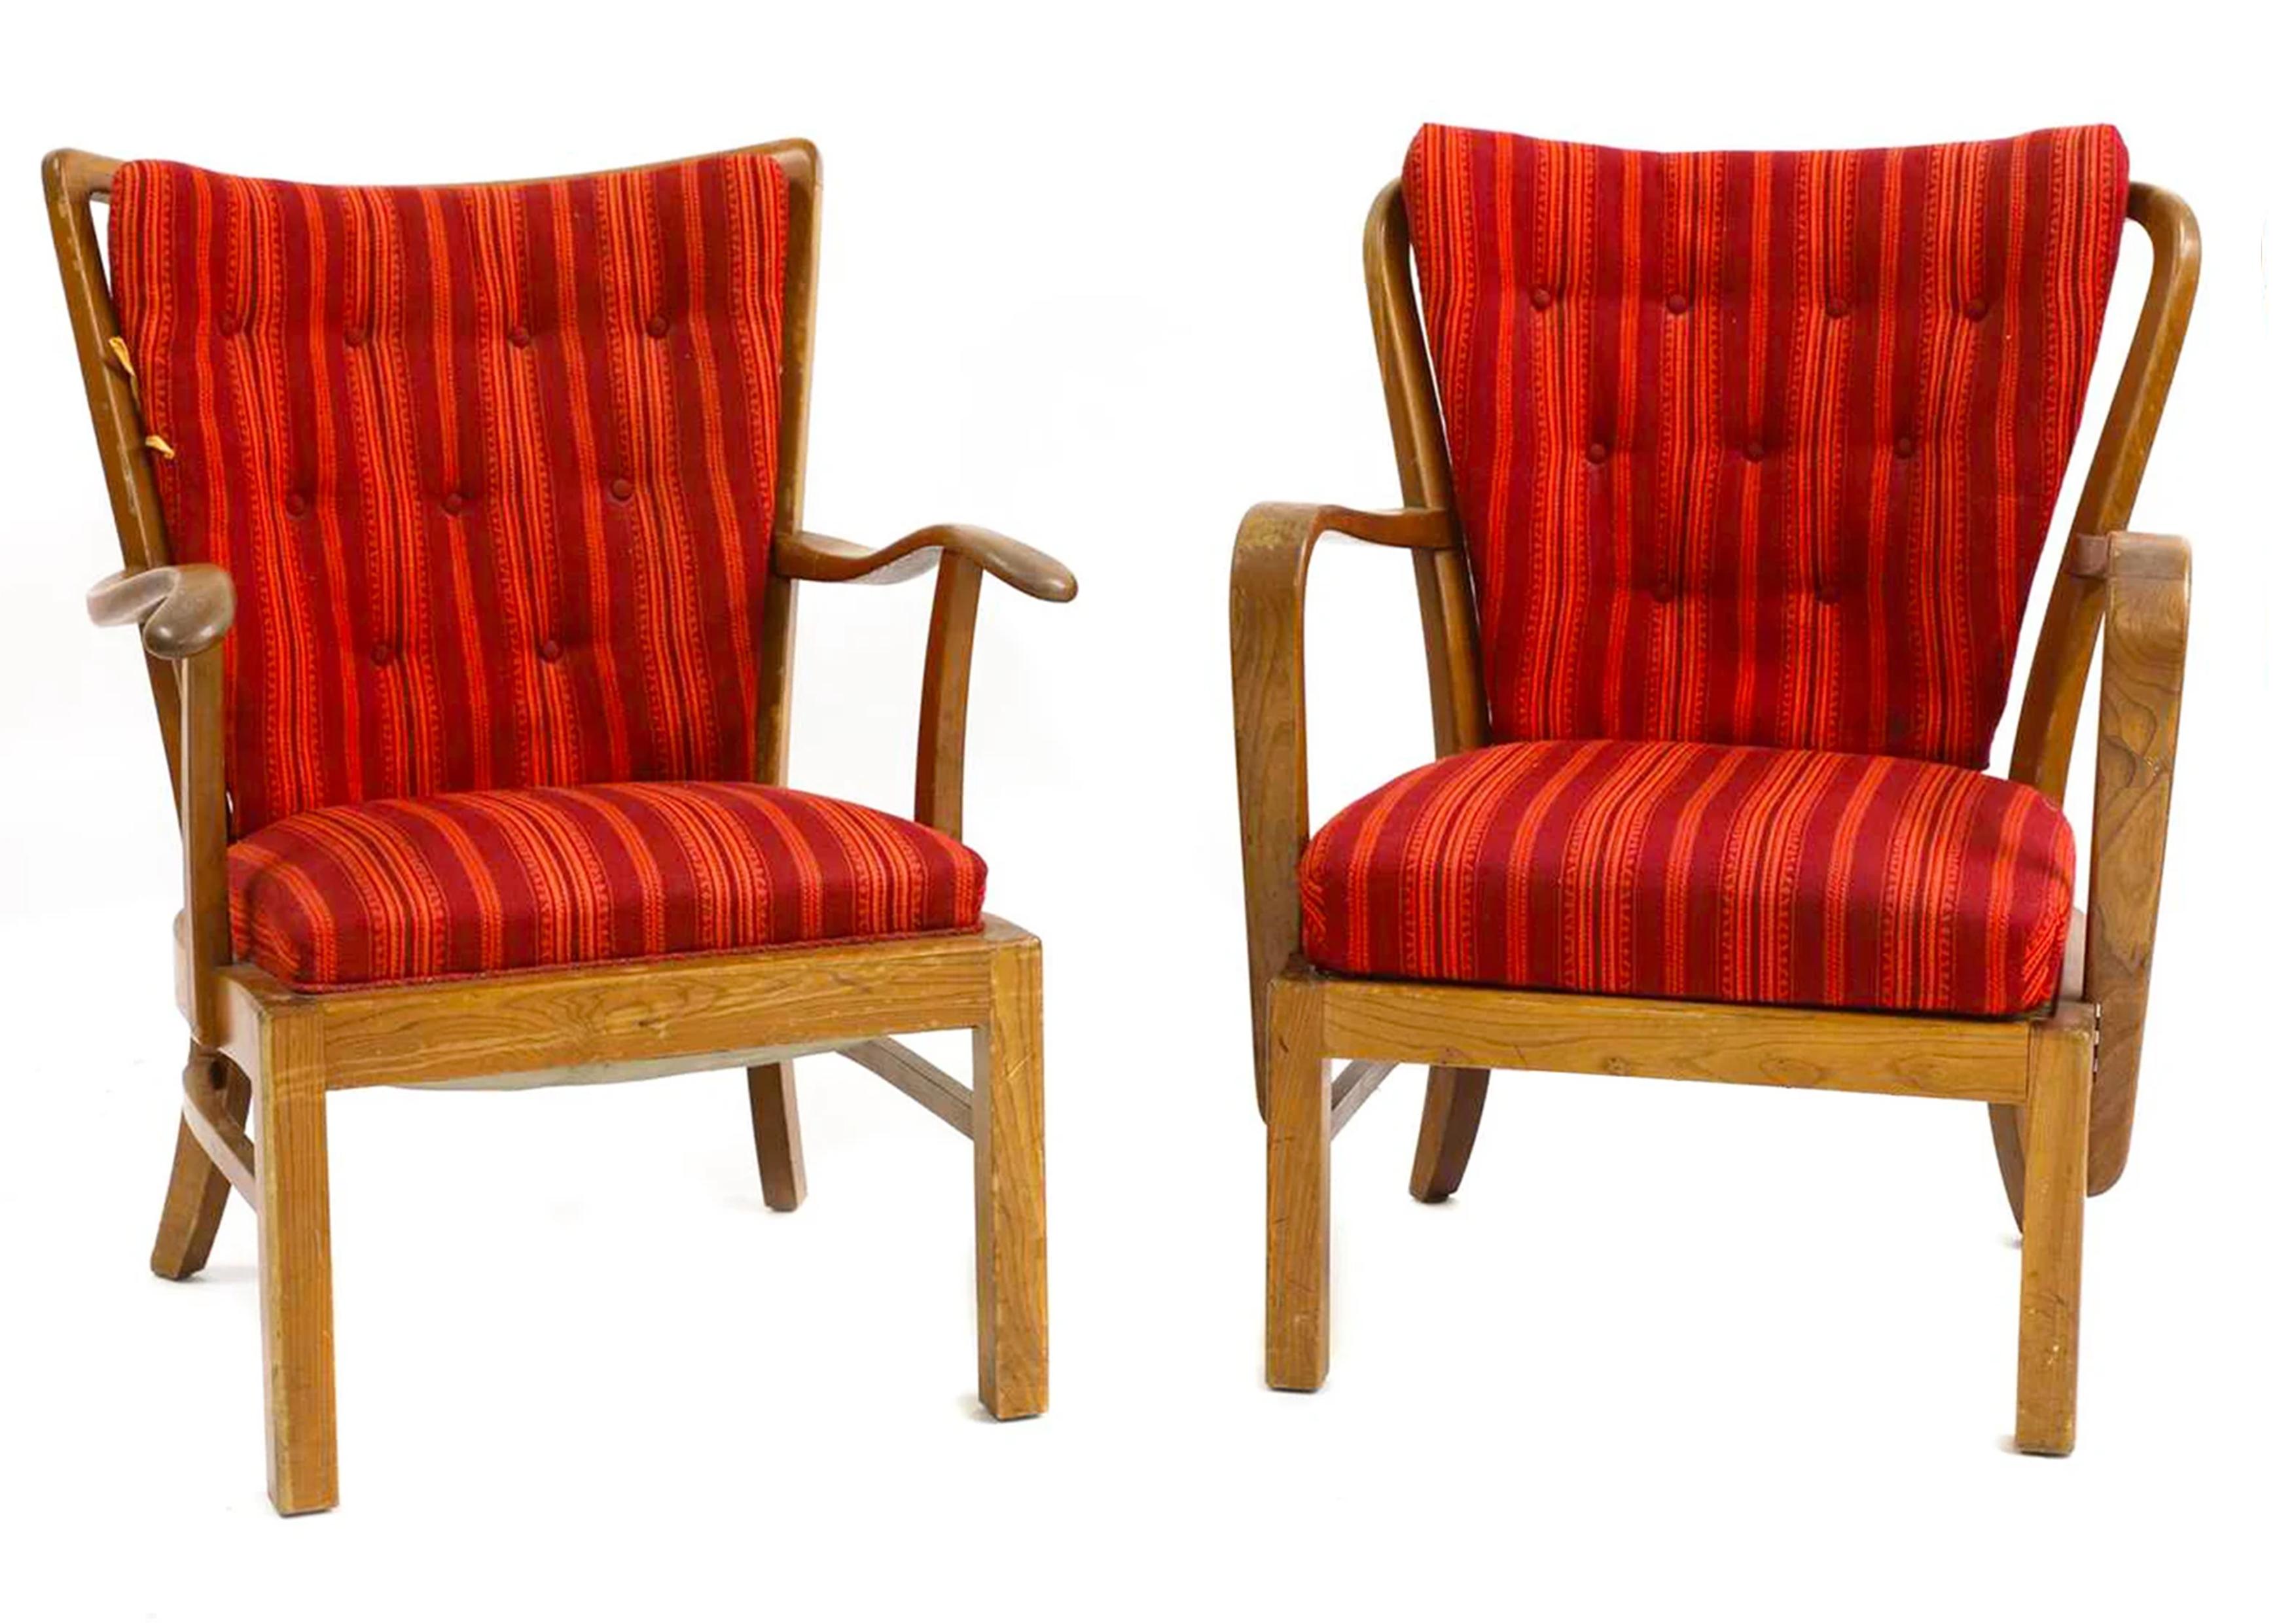 A pair of his and hers Fritz Hansen Model 1628 stained beech open framed armchair with red upholstery designed by Søren Hansen made in Denmark in the 1940s 

Fritz Hansen FH brand mark stamped to the under frame of the chair.

Fritz Hansen, also